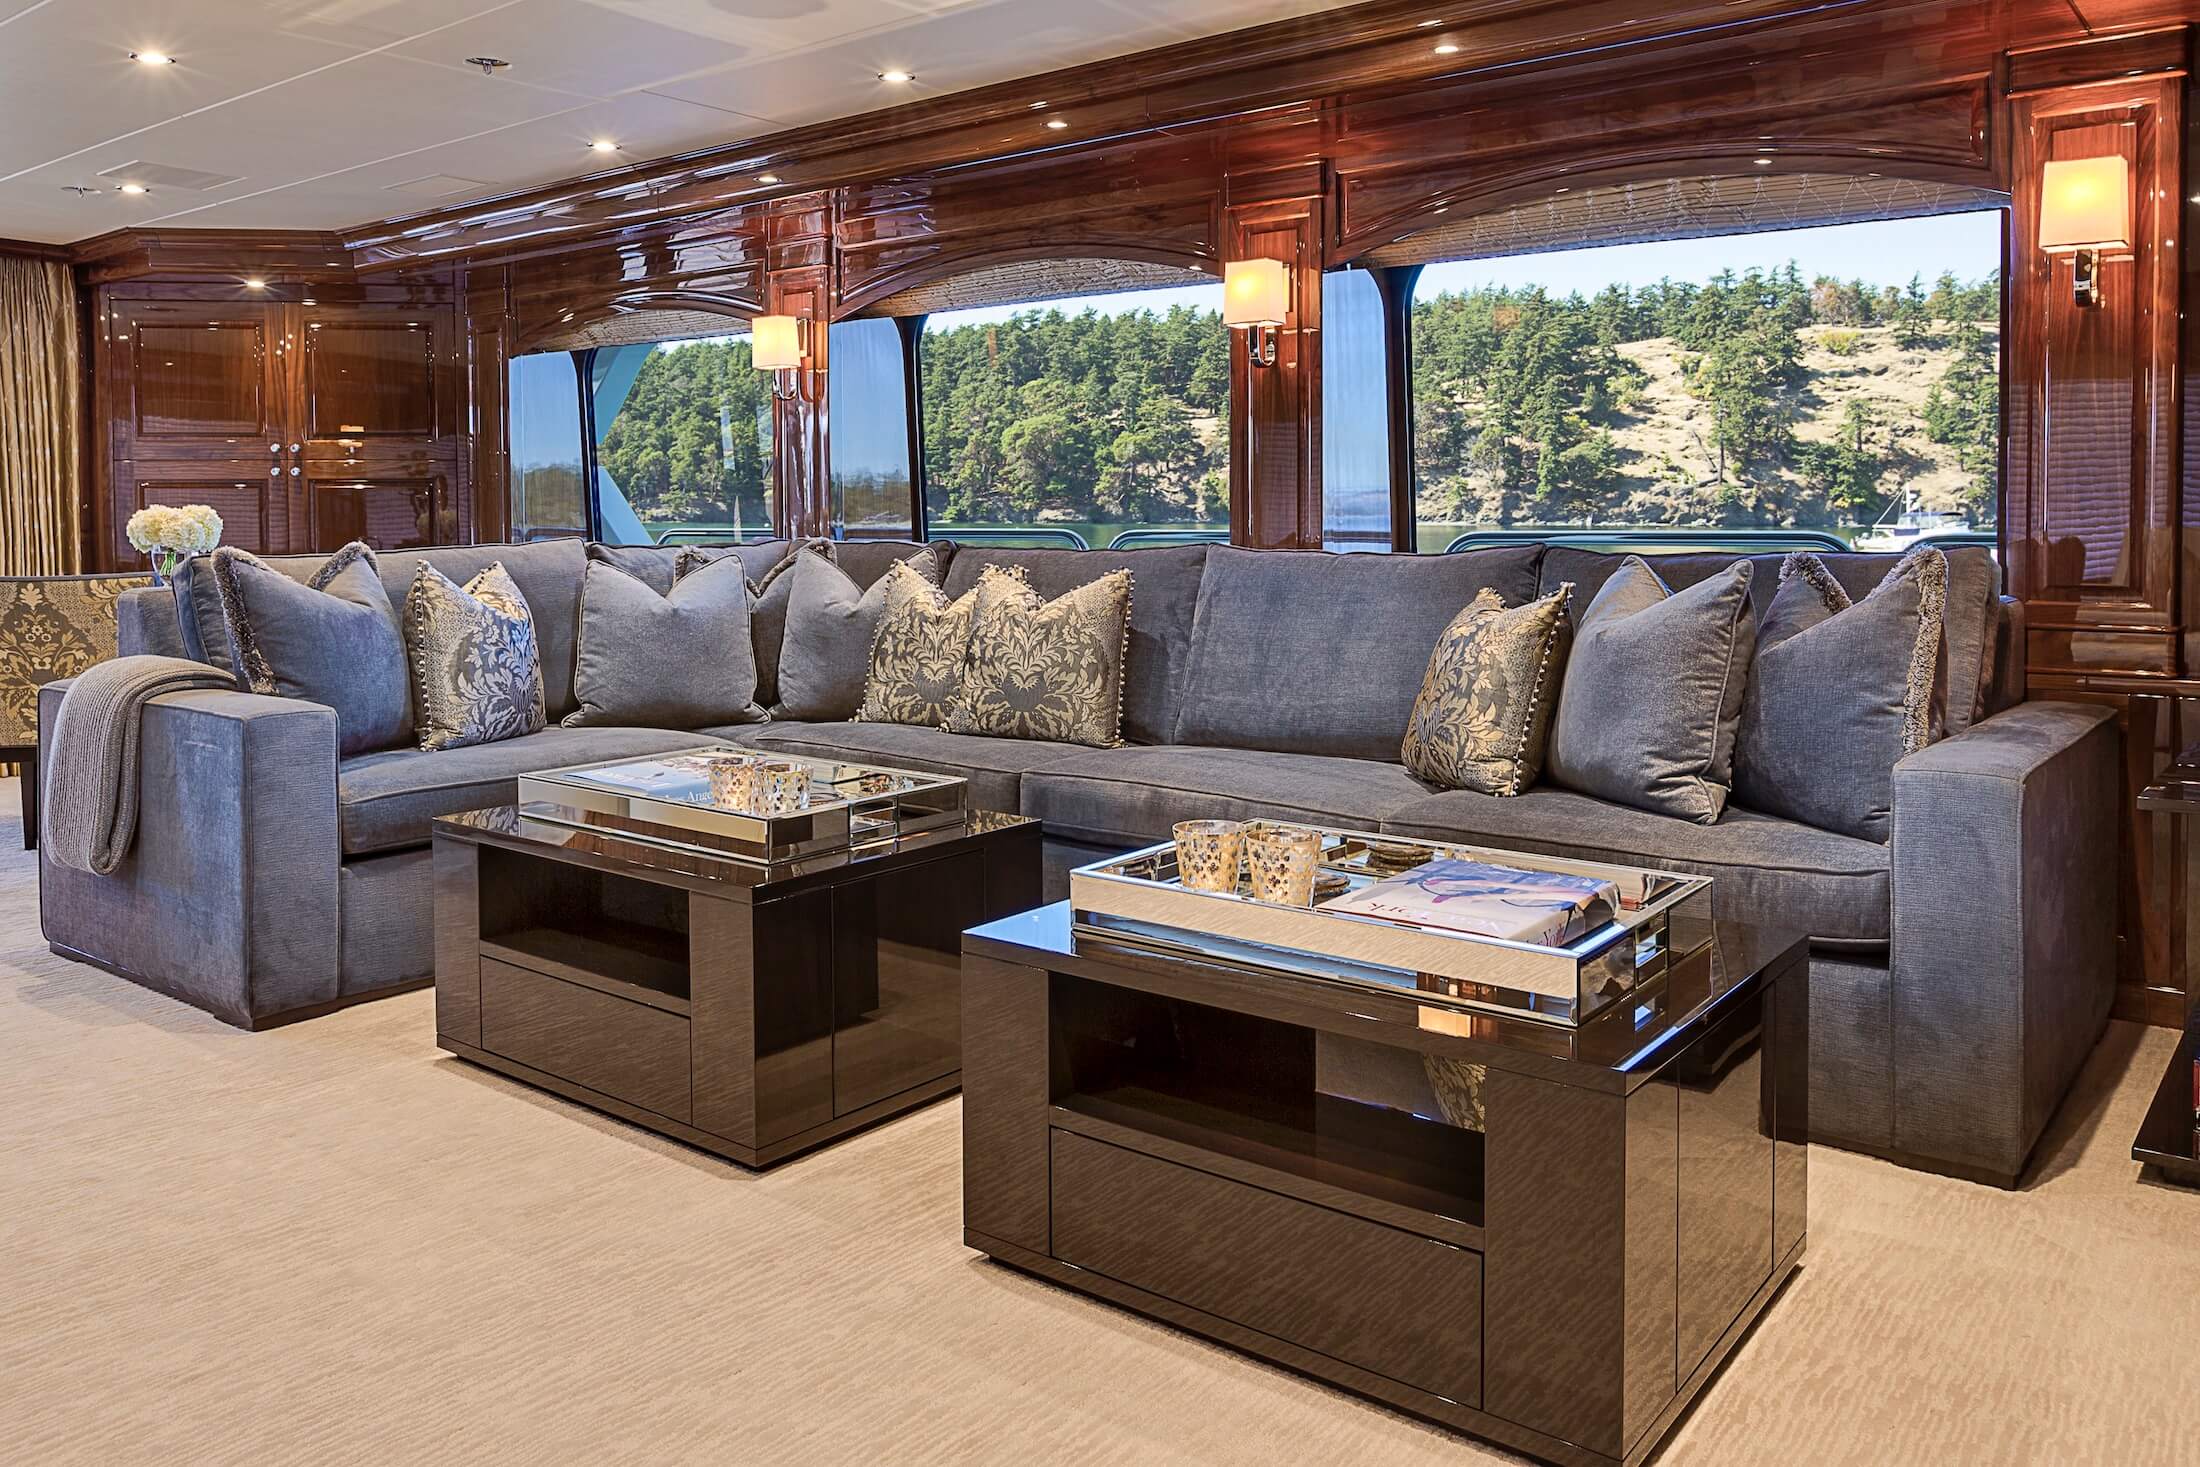 D'Natalin Luxury Yacht sectional sofa seating area